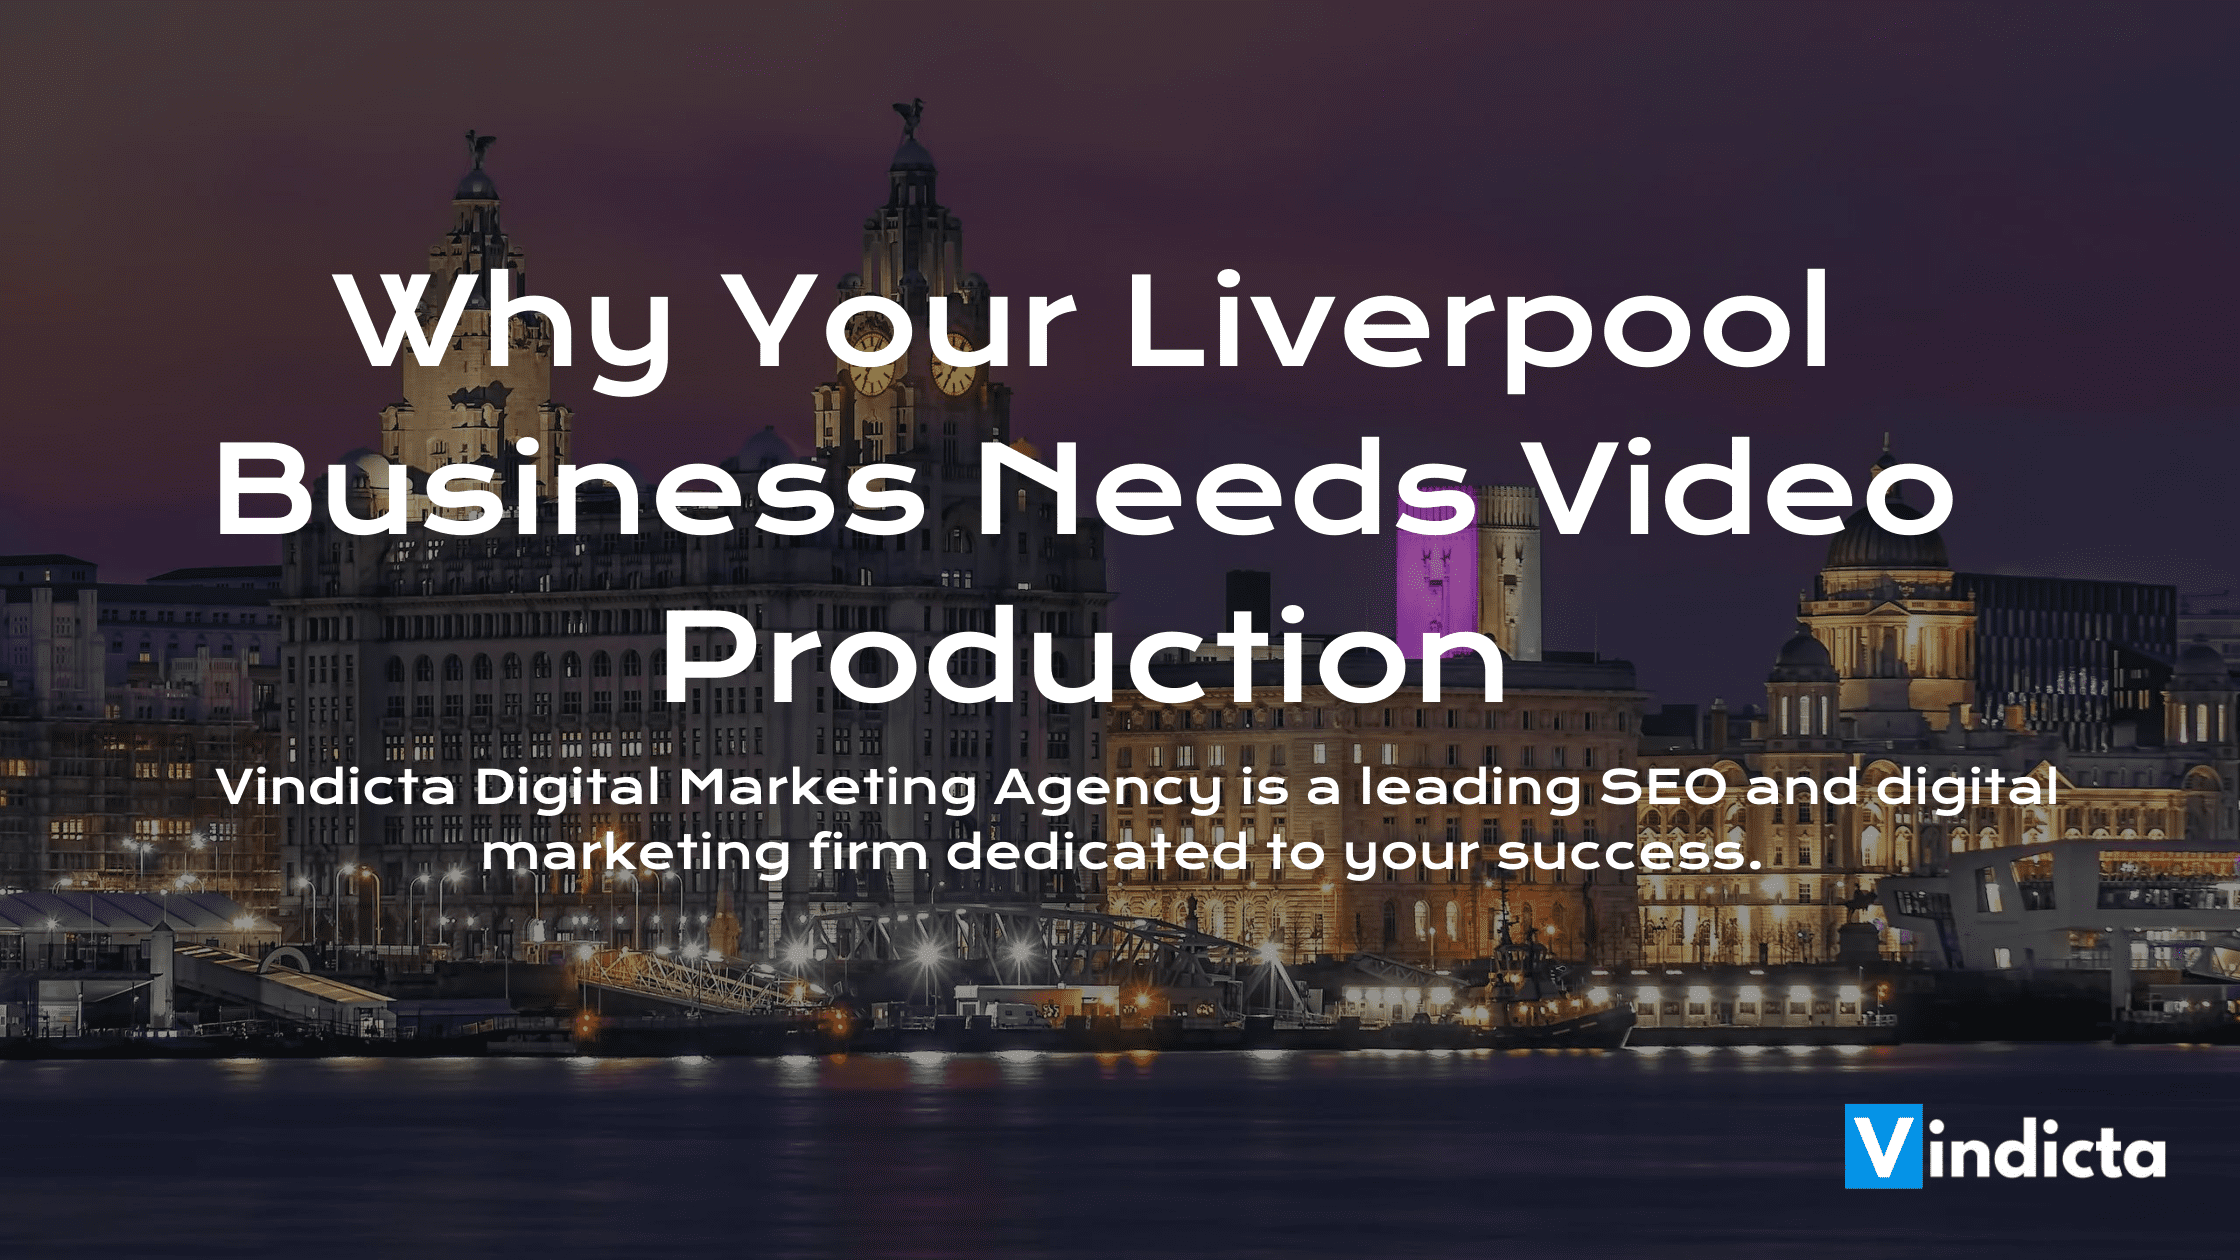 Why-Your-Liverpool-Business-Needs-Video-ProductionWhy-Your-Liverpool-Business-Needs-Video-Production